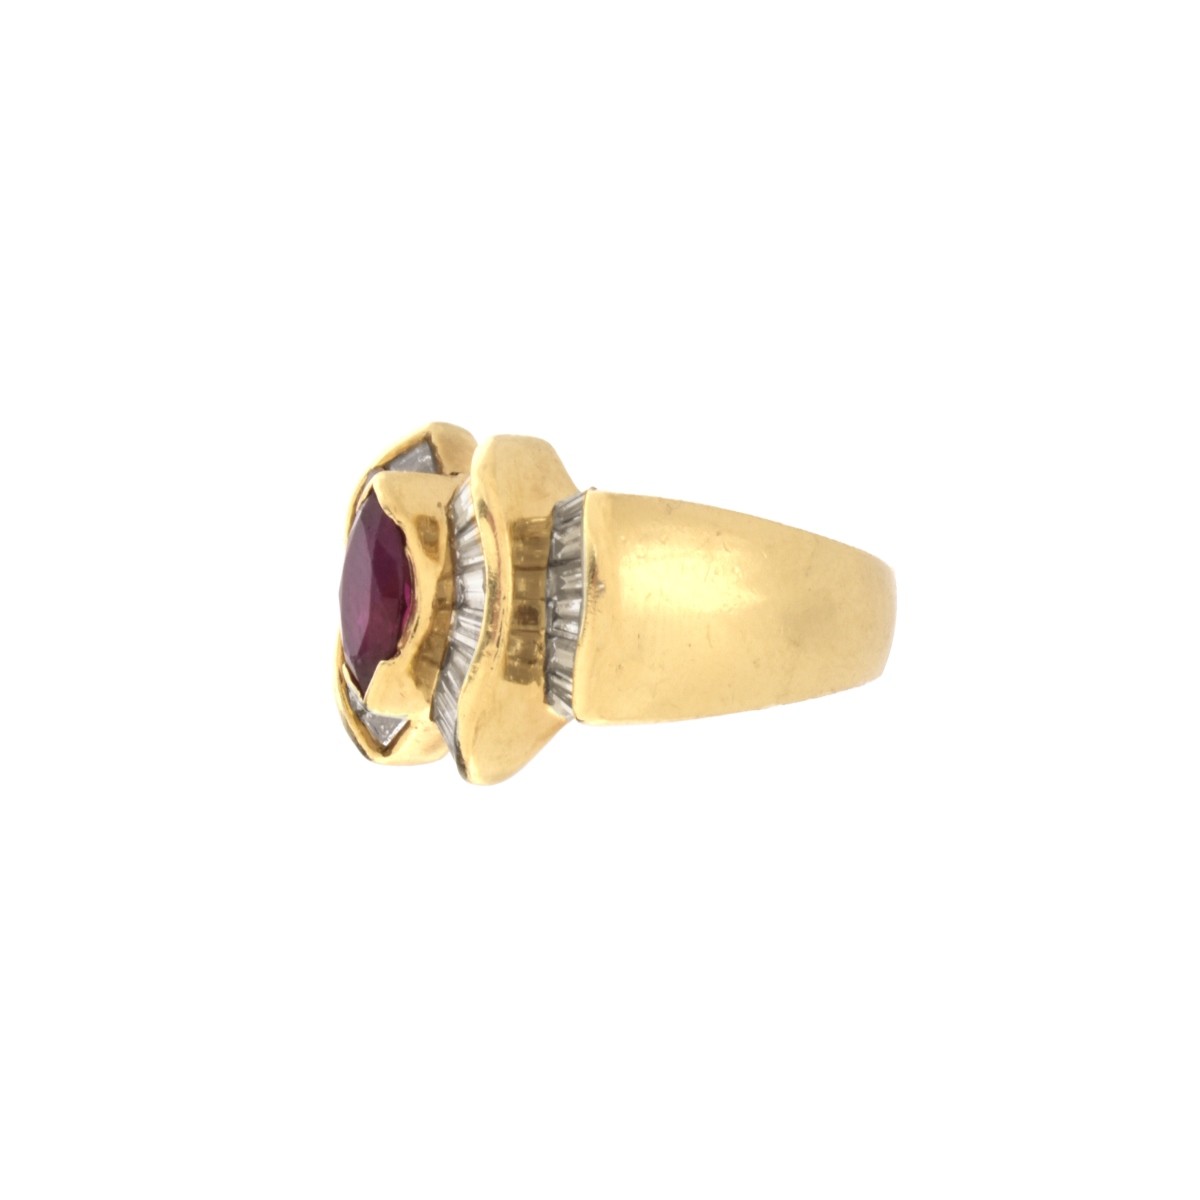 Ruby, Diamond and 14K Ring